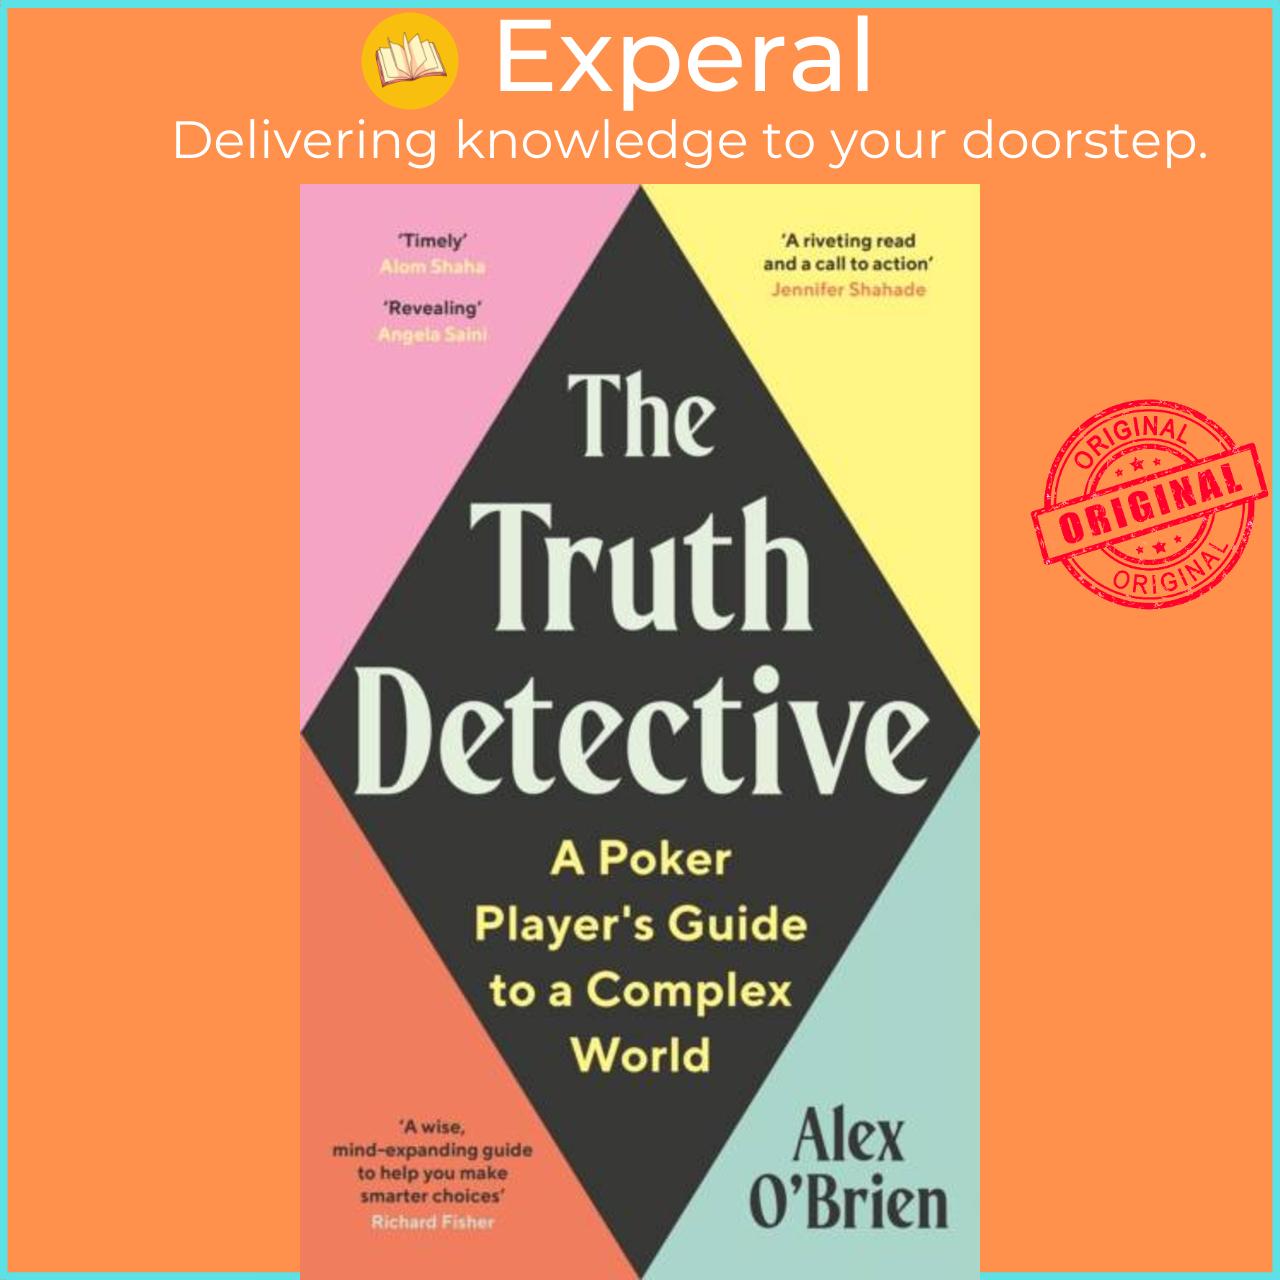 Sách - The Truth Detective - A Poker Player's Guide to a Complex World by Alex O'Brien (UK edition, hardcover)